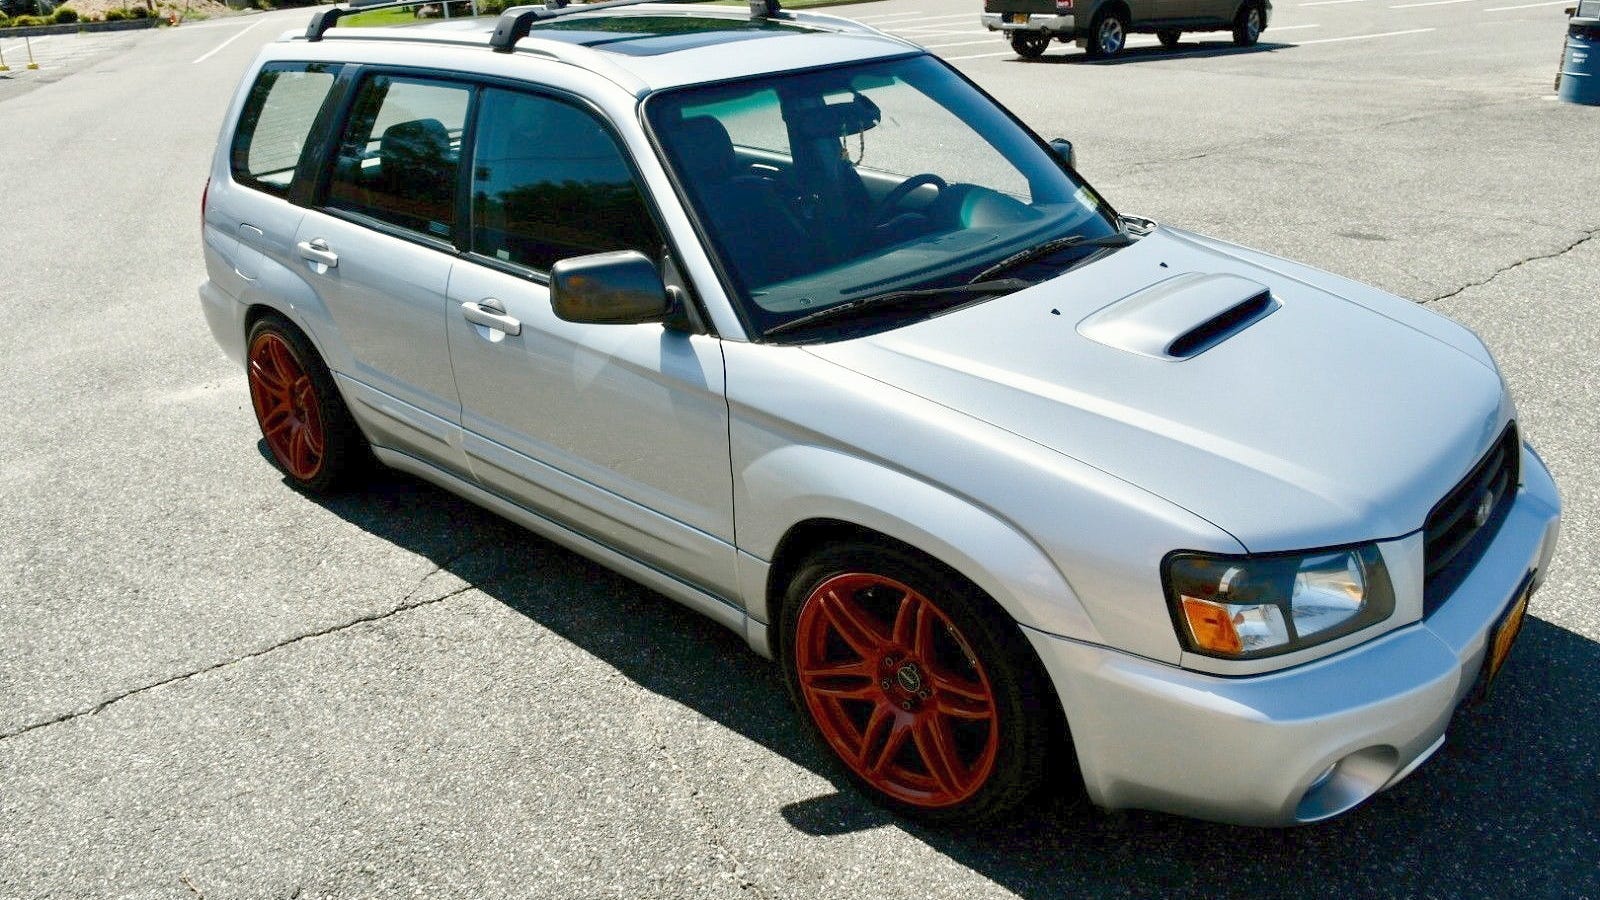 At 8,100, Could You See This 2005 Subaru Forester For The